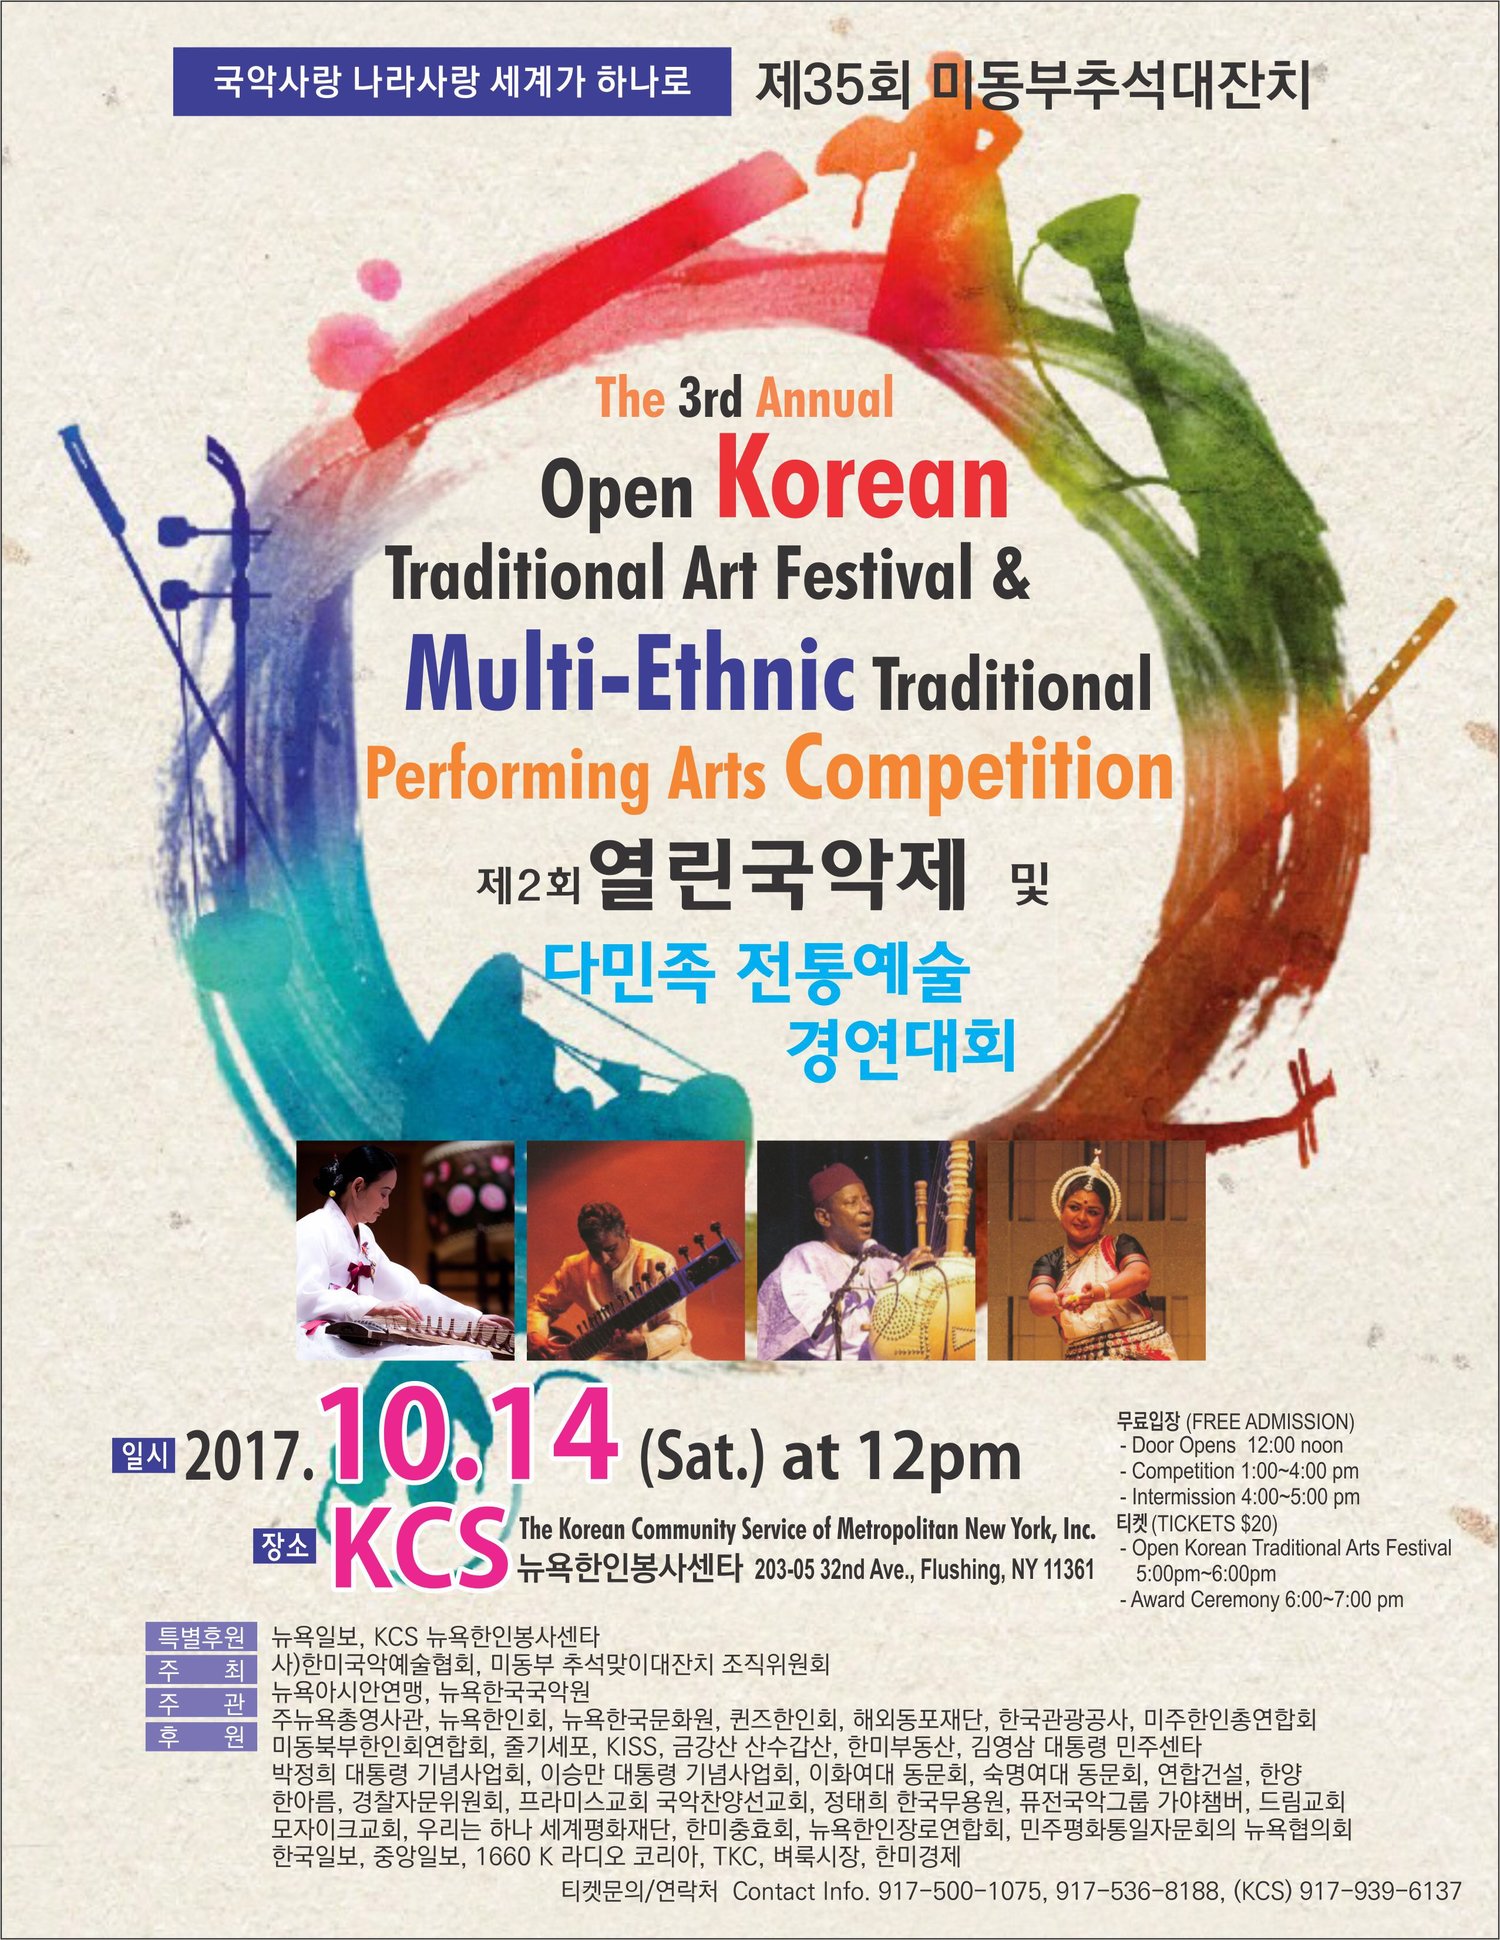 The 3rd Annual Multi-Ethnic Performing Arts Competition